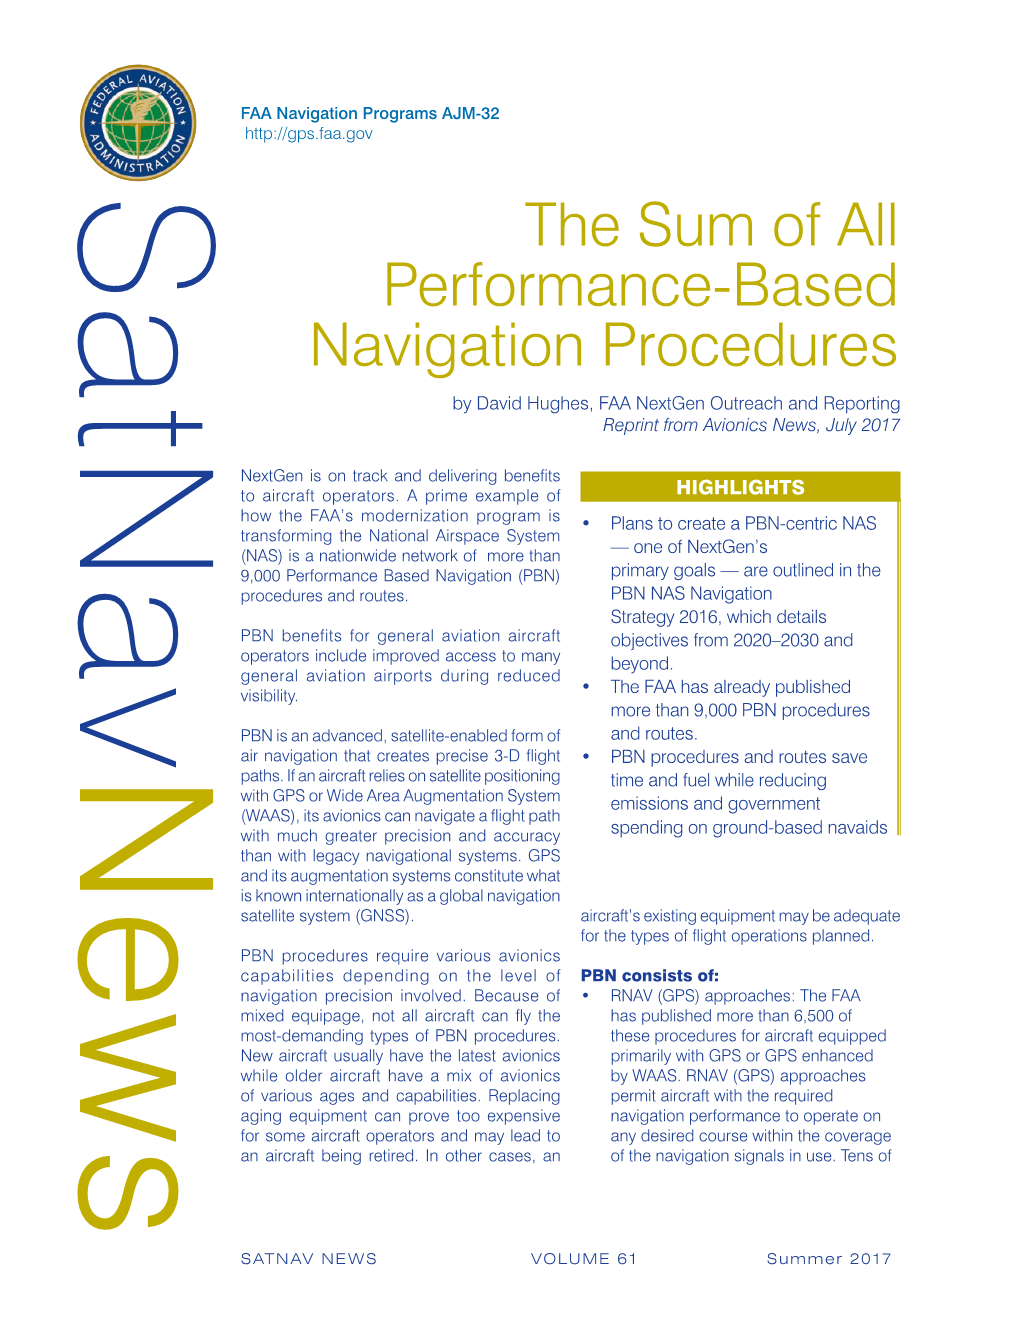 The Sum of All Performance-Based Navigation Procedures by David Hughes, FAA Nextgen Outreach and Reporting Reprint from Avionics News, July 2017